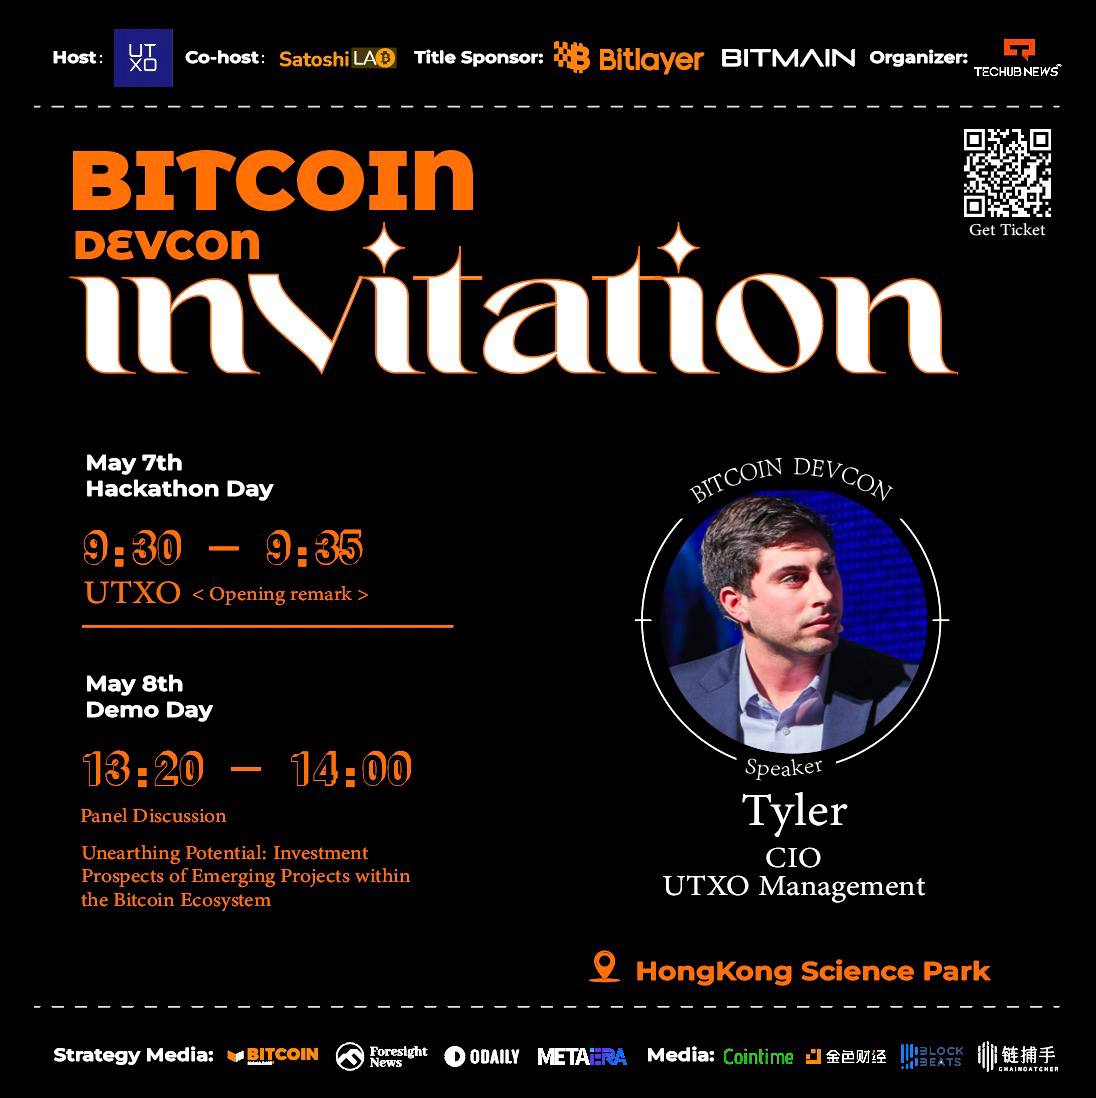 See ya in HK for @TheBitcoinConf @bitcoindevcon and @Ordinals_Asia! Want to meet with all the builder and founders across the Asian Bitcoin ecosystem!